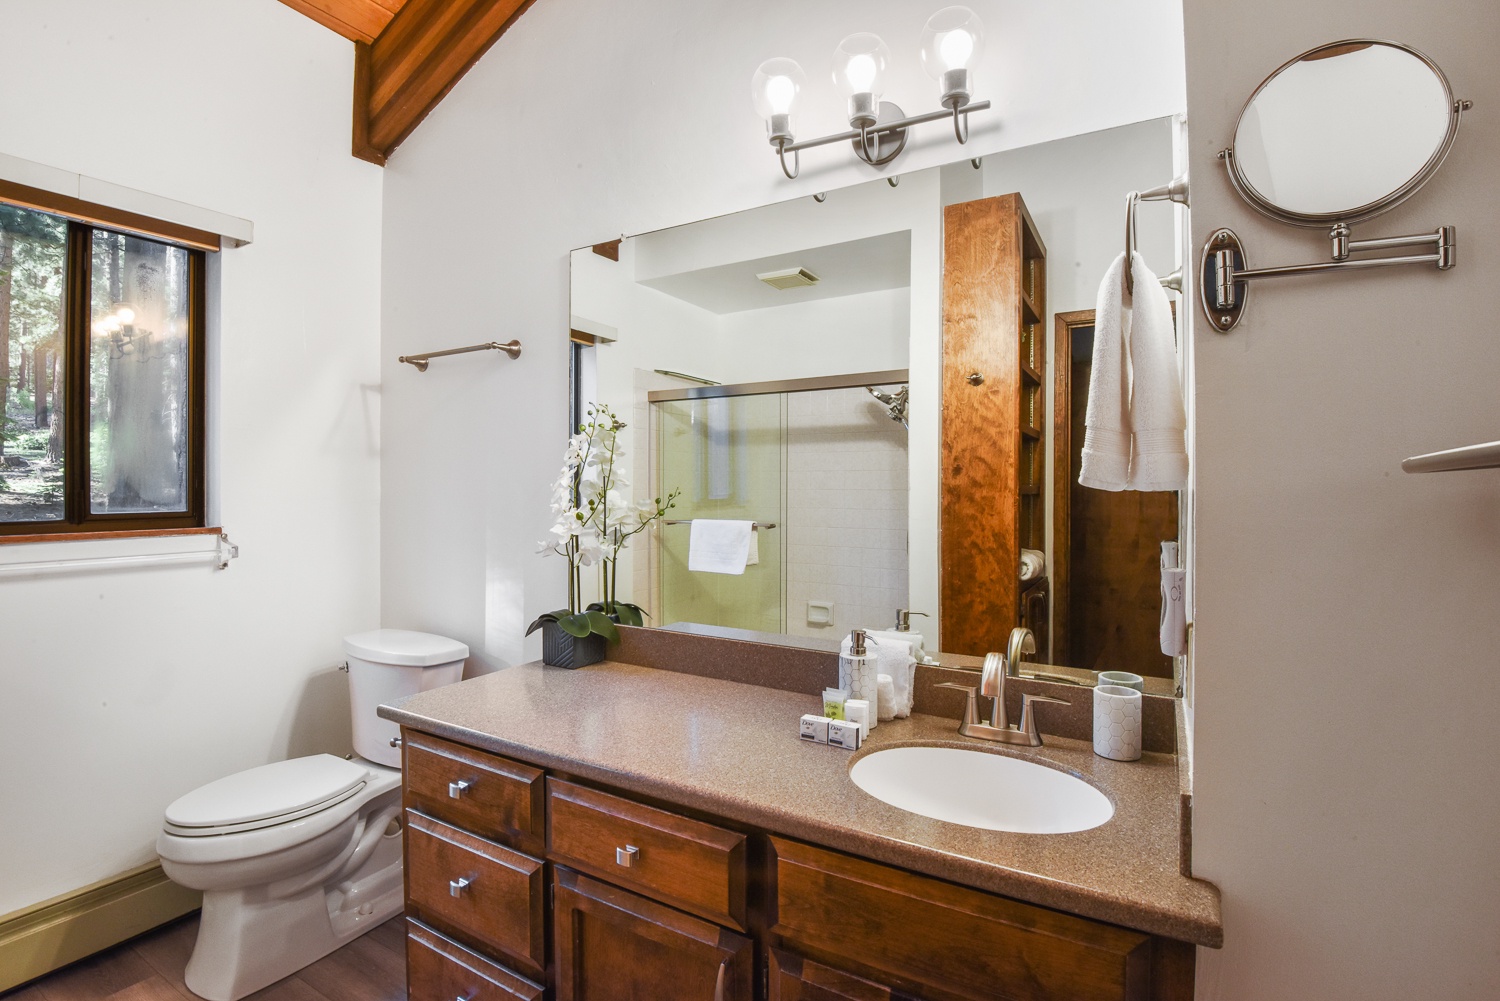 Unit #3: The 3rd floor full bathroom offers a large single vanity & shower/tub combo